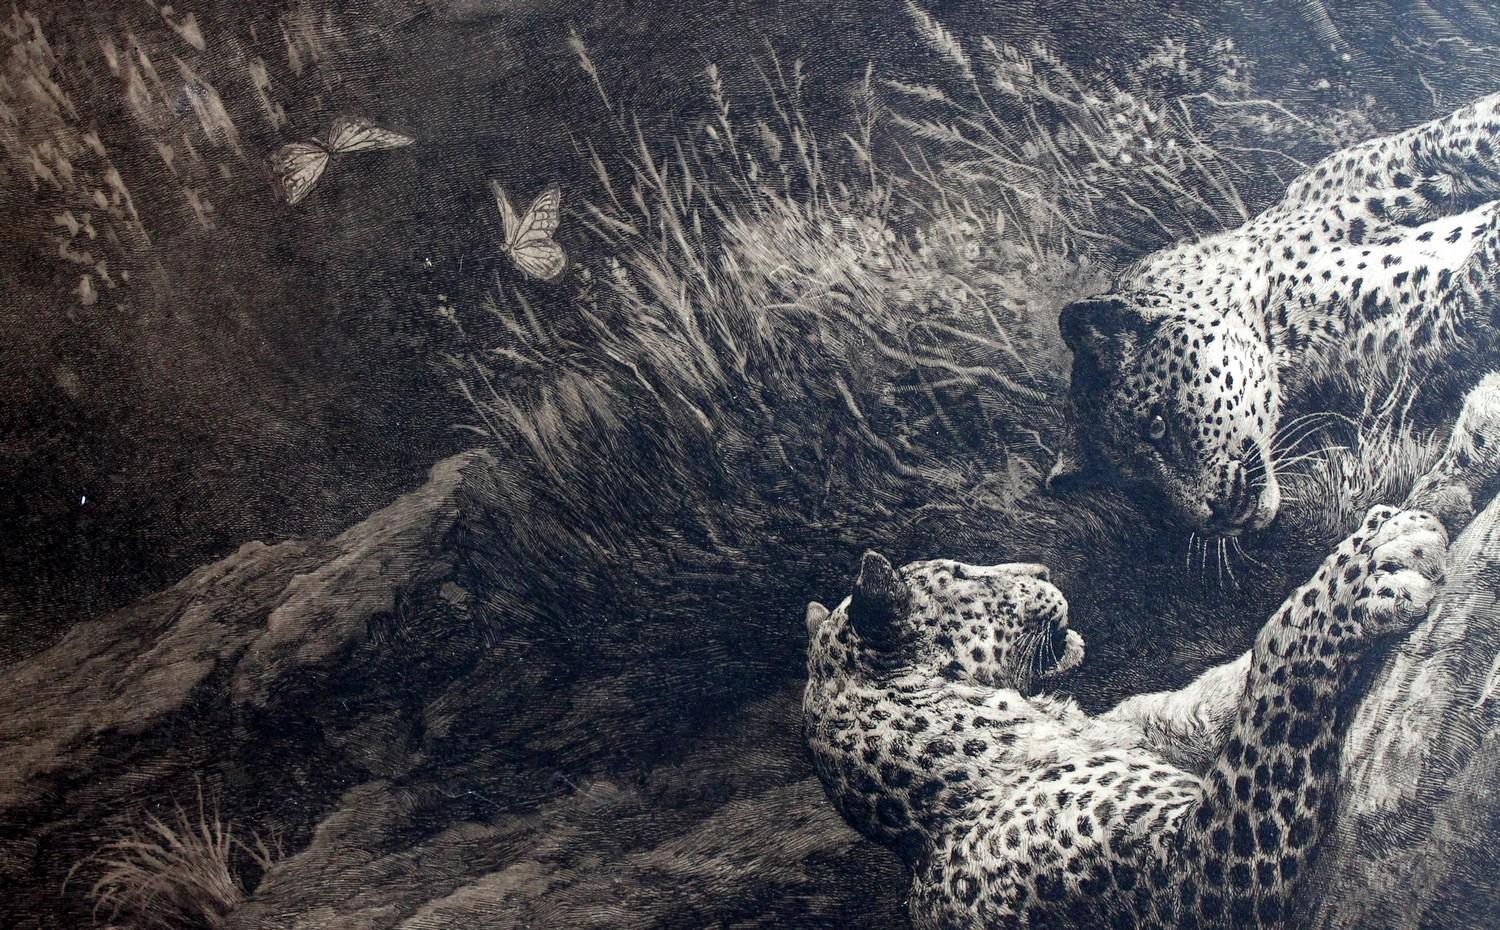 Leopards etching by Herbert Dicksee, Play. A very strong black and white wildlife picture of a pair of leopards climbing on a tree trunk playing. The powerful etching is by Herbert Thomas Dicksee signed and dated 1907 and published May 1st 1904 by